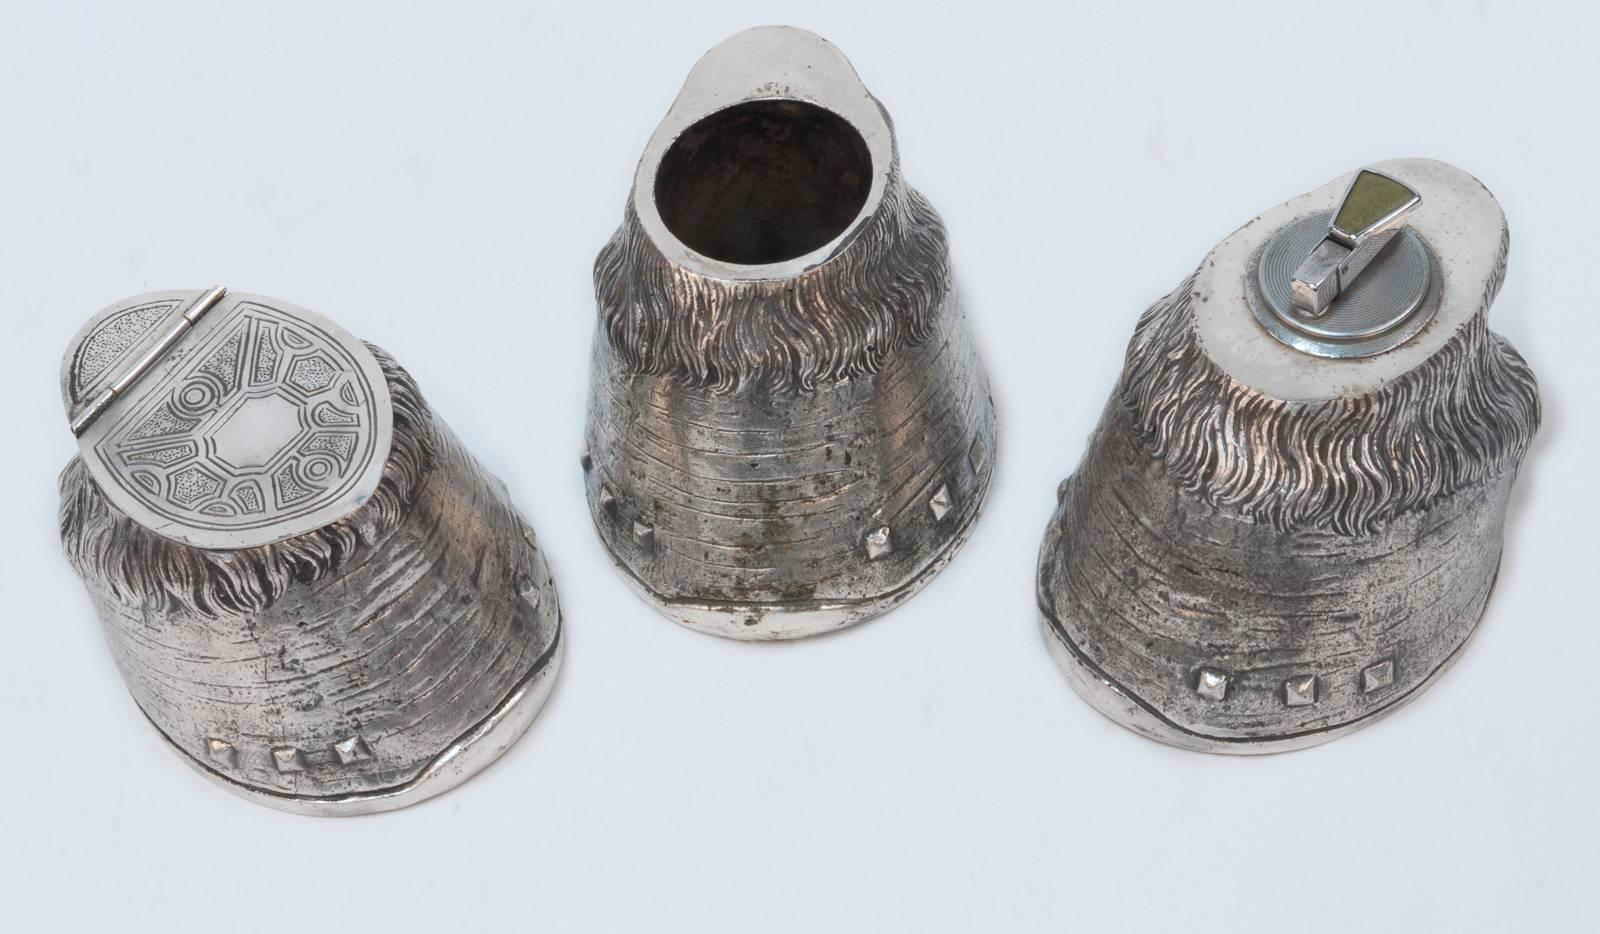 Spanish Three-Piece Silvered Bronze Smoking Compendium in the Form of Horses Hooves